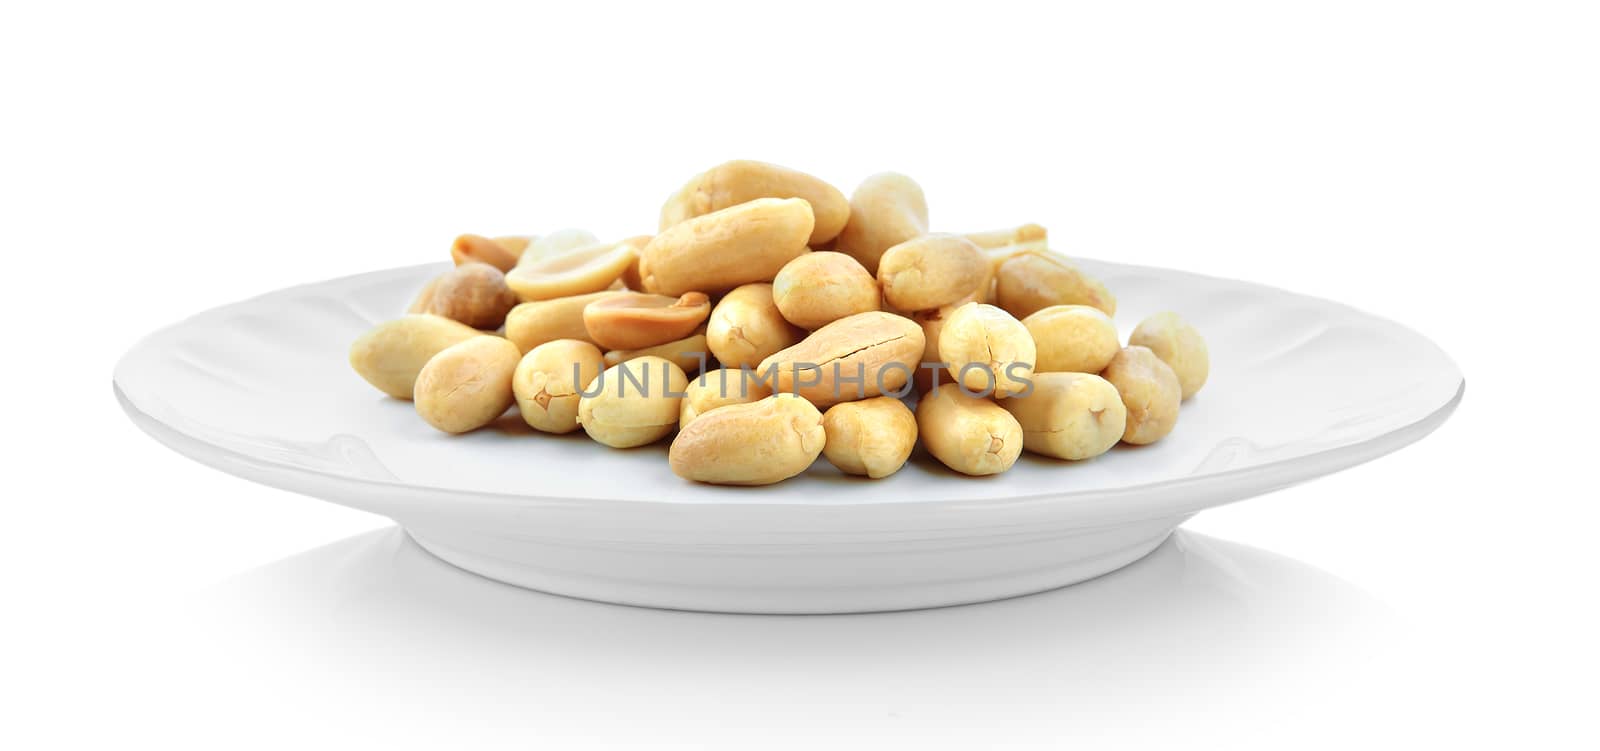 peanuts in white plate on white background